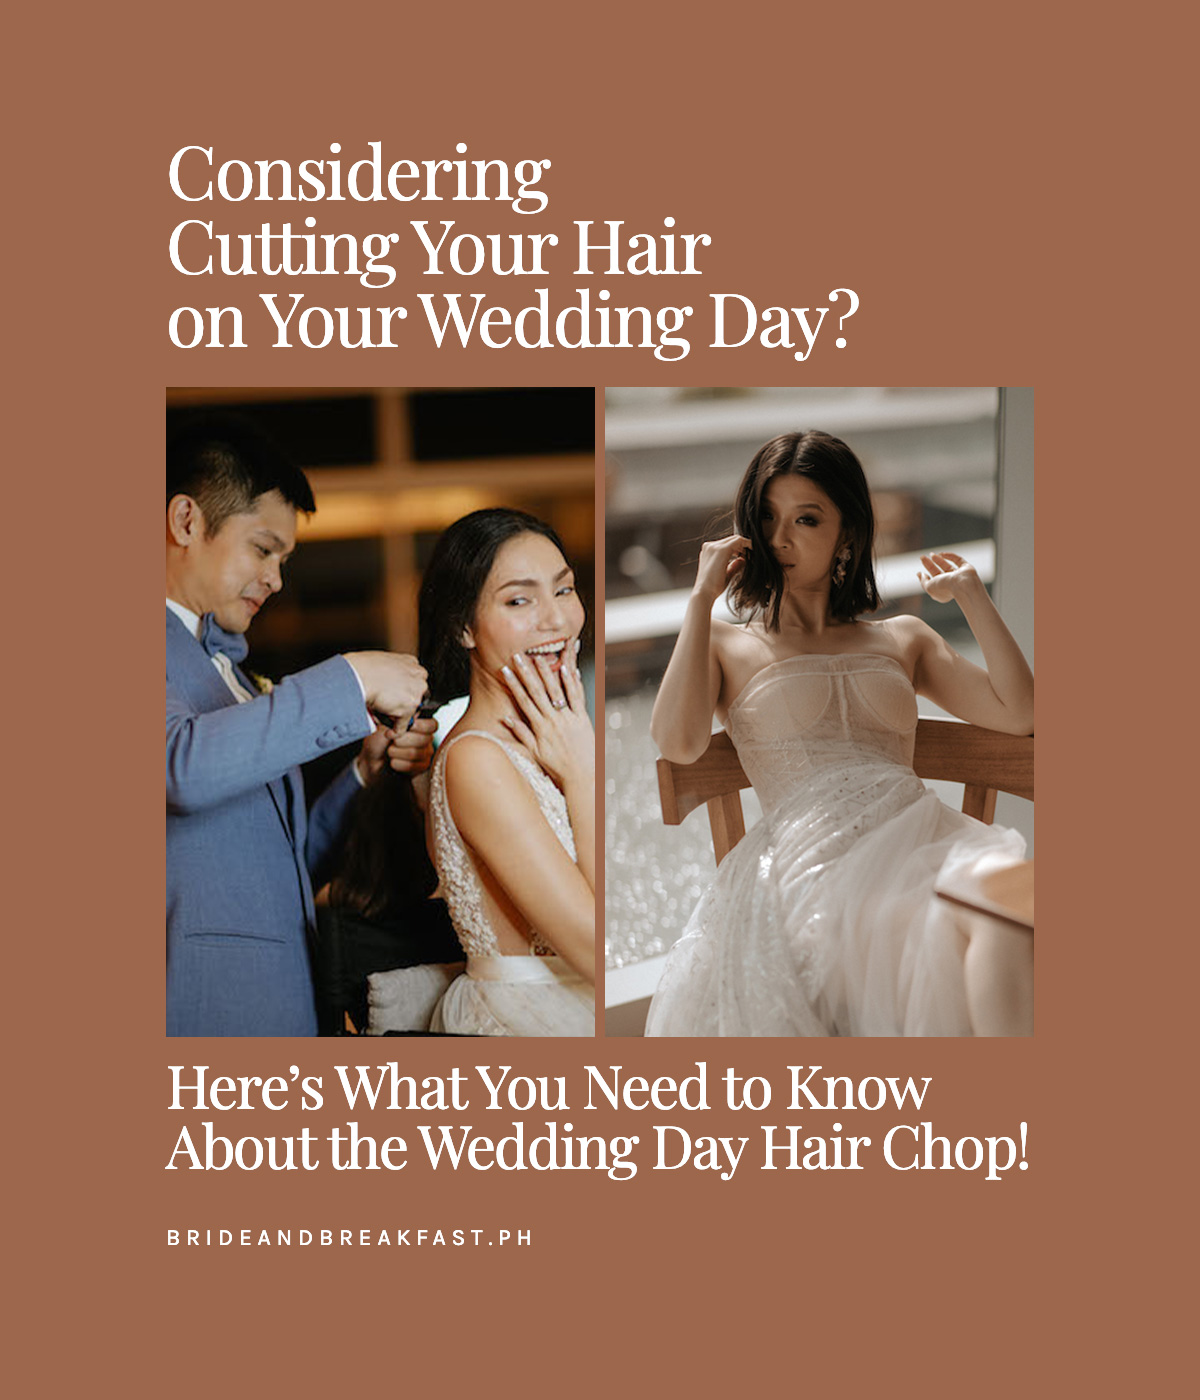 Considering Cutting Your Hair on Your Wedding Day? Here’s What You Need to Know About the Wedding Day Hair Chop!